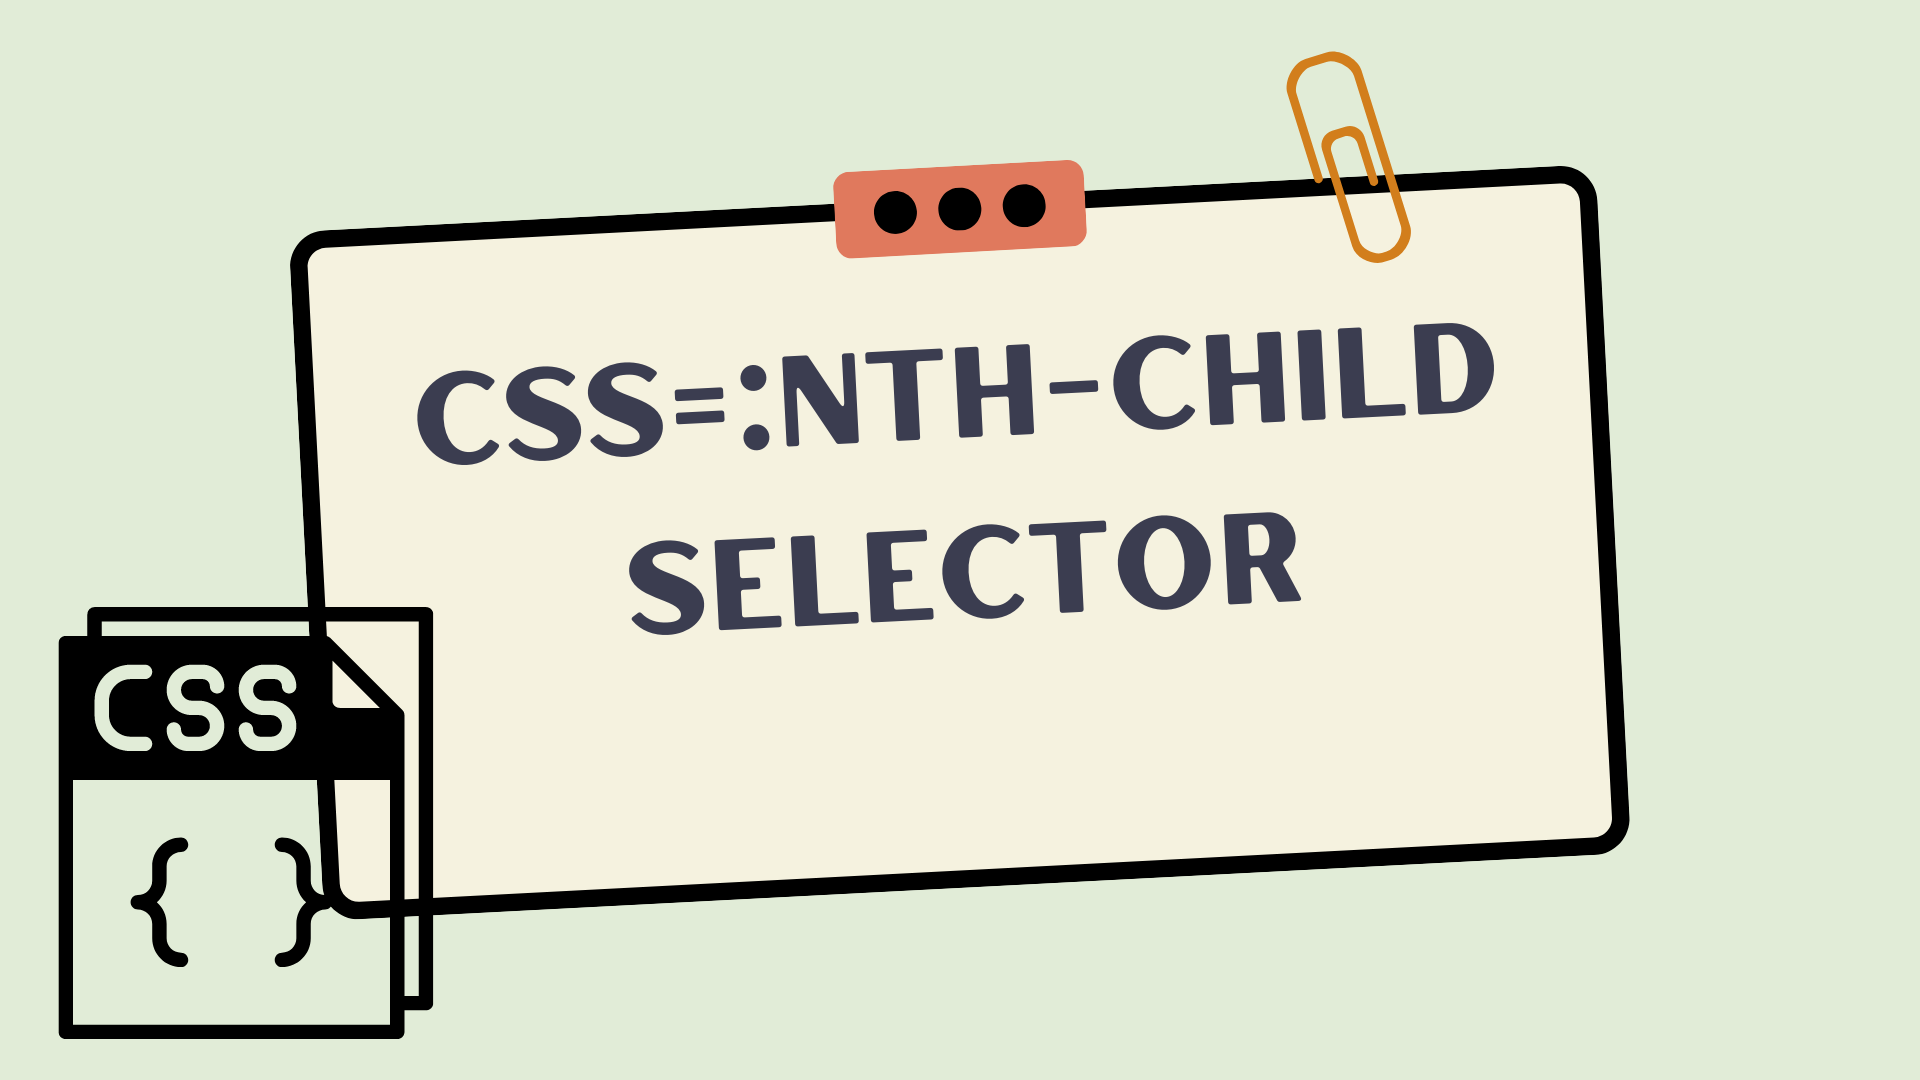 CSS- nth Child Selectors